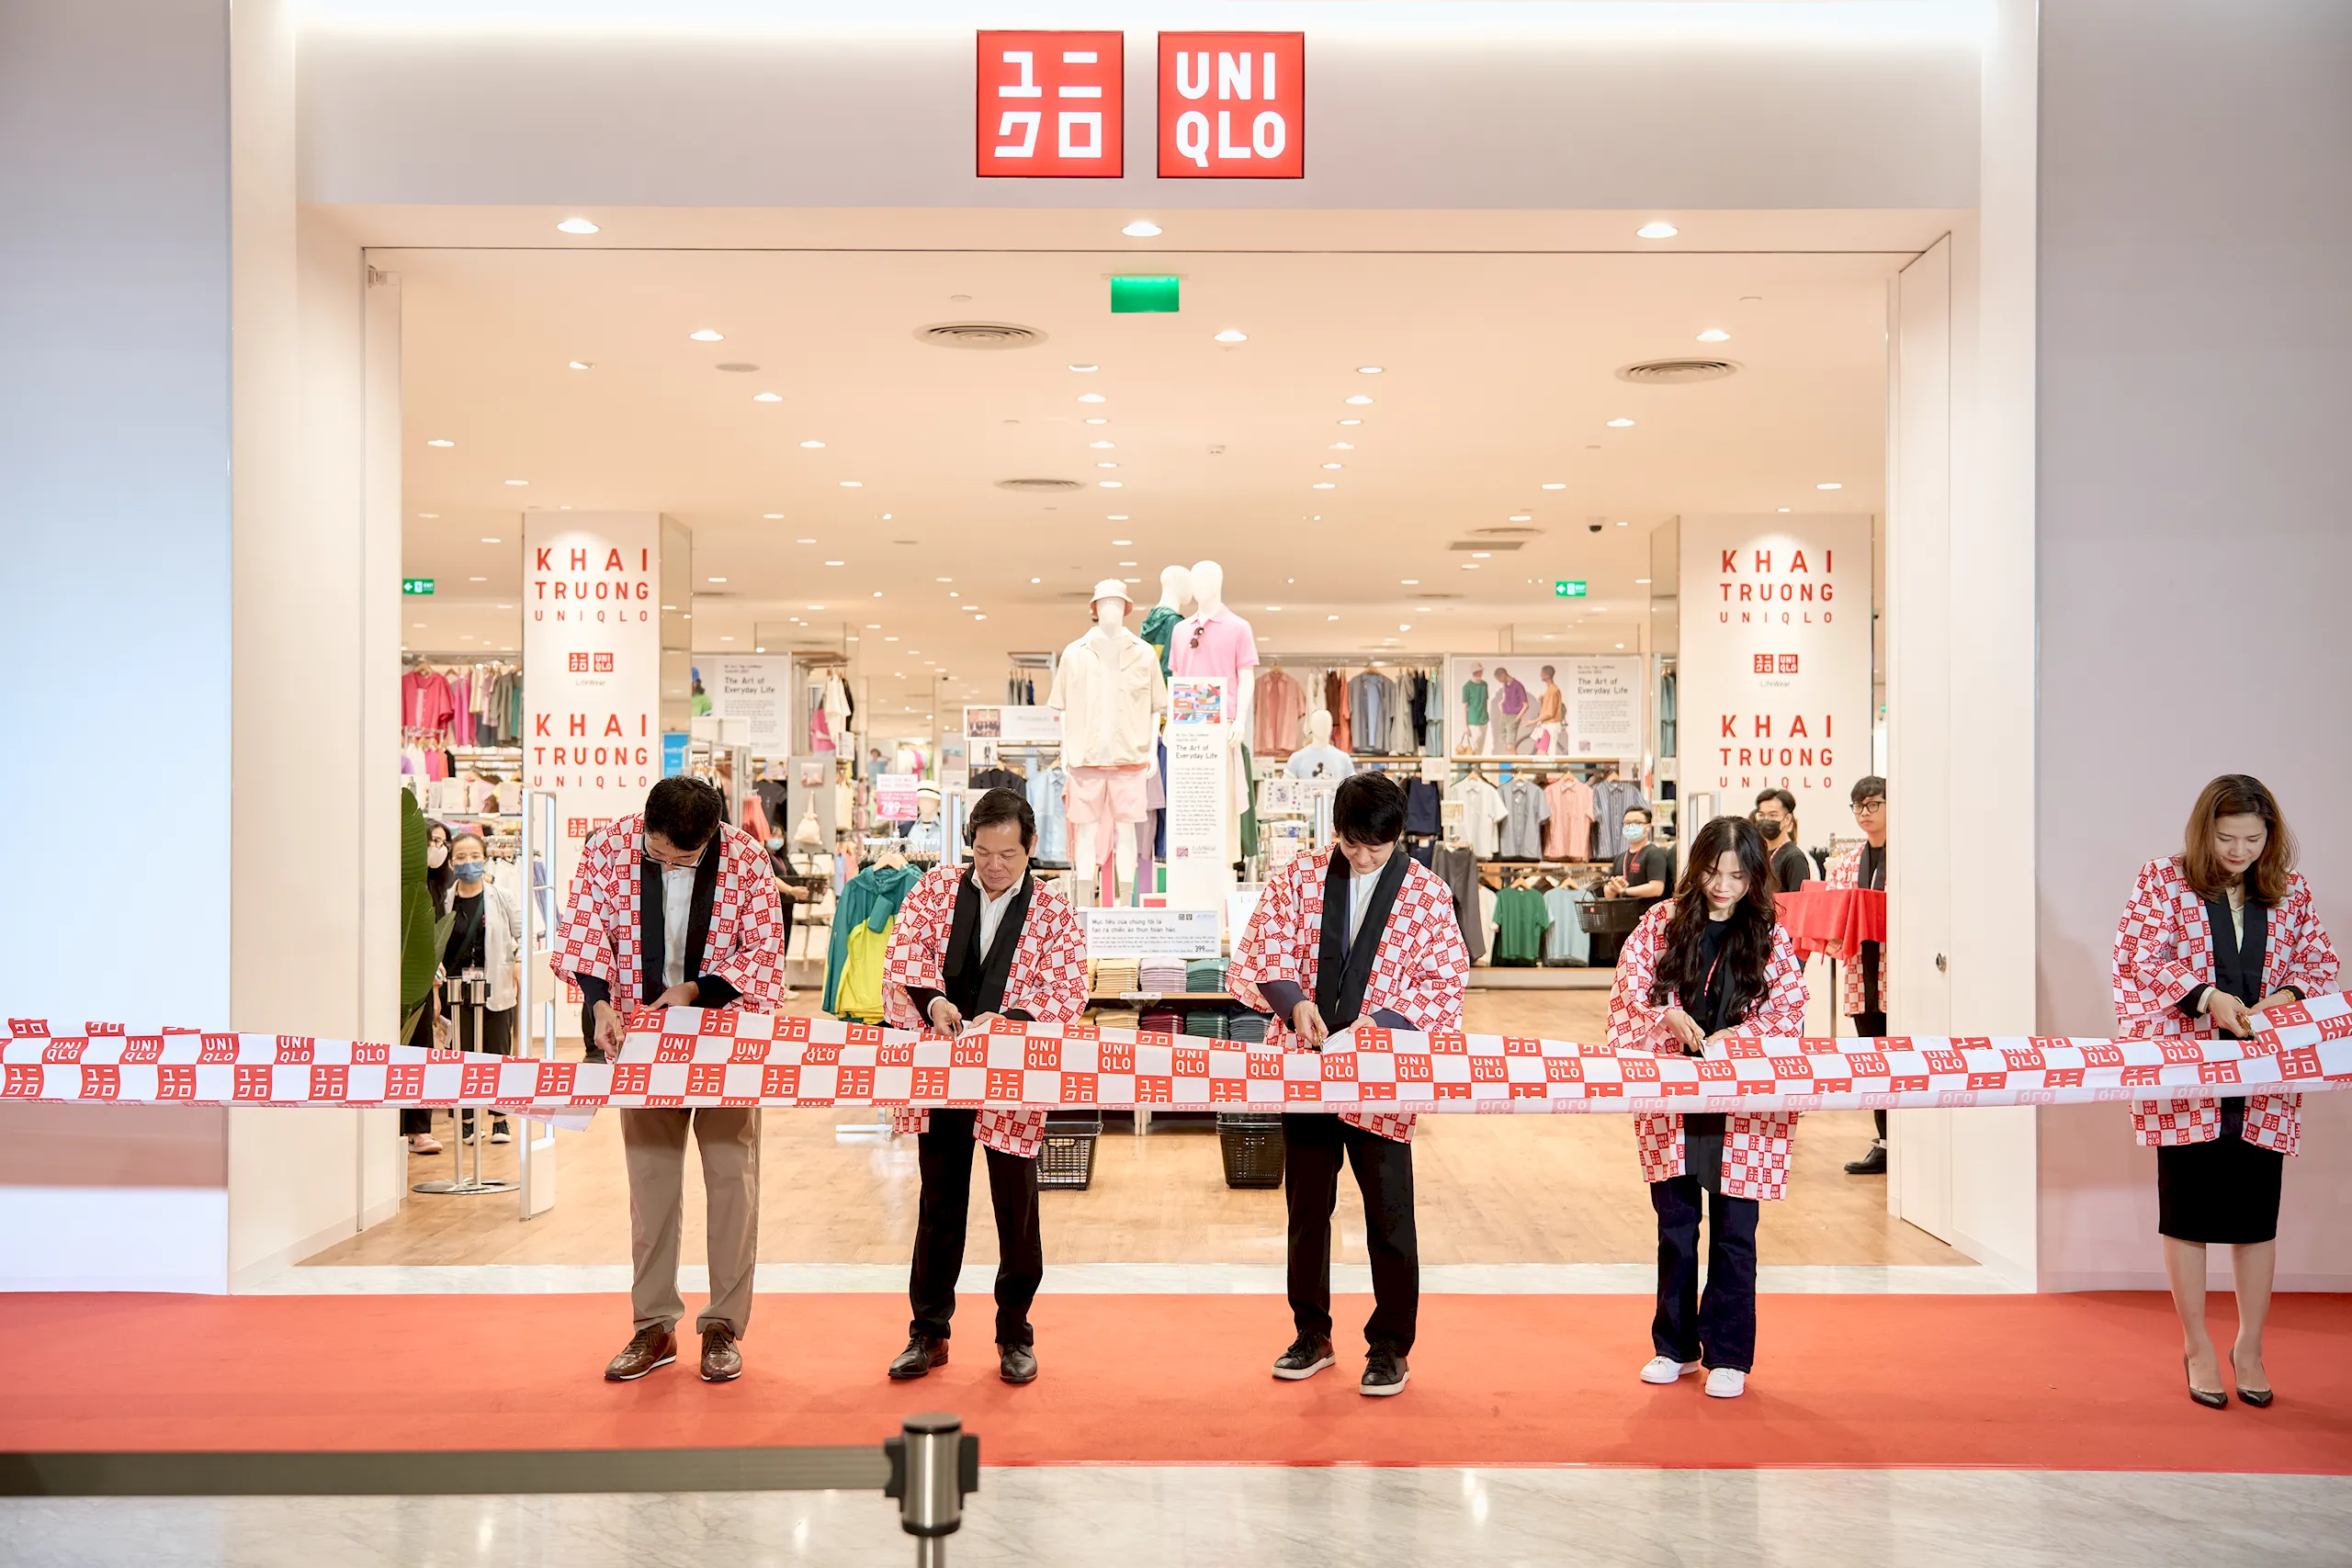 UNIQLO on Twitter Shmuli We sincerely apologize we are sorting this  issue with our team Please DM us your email so we can manually unsubscribe  you  Twitter